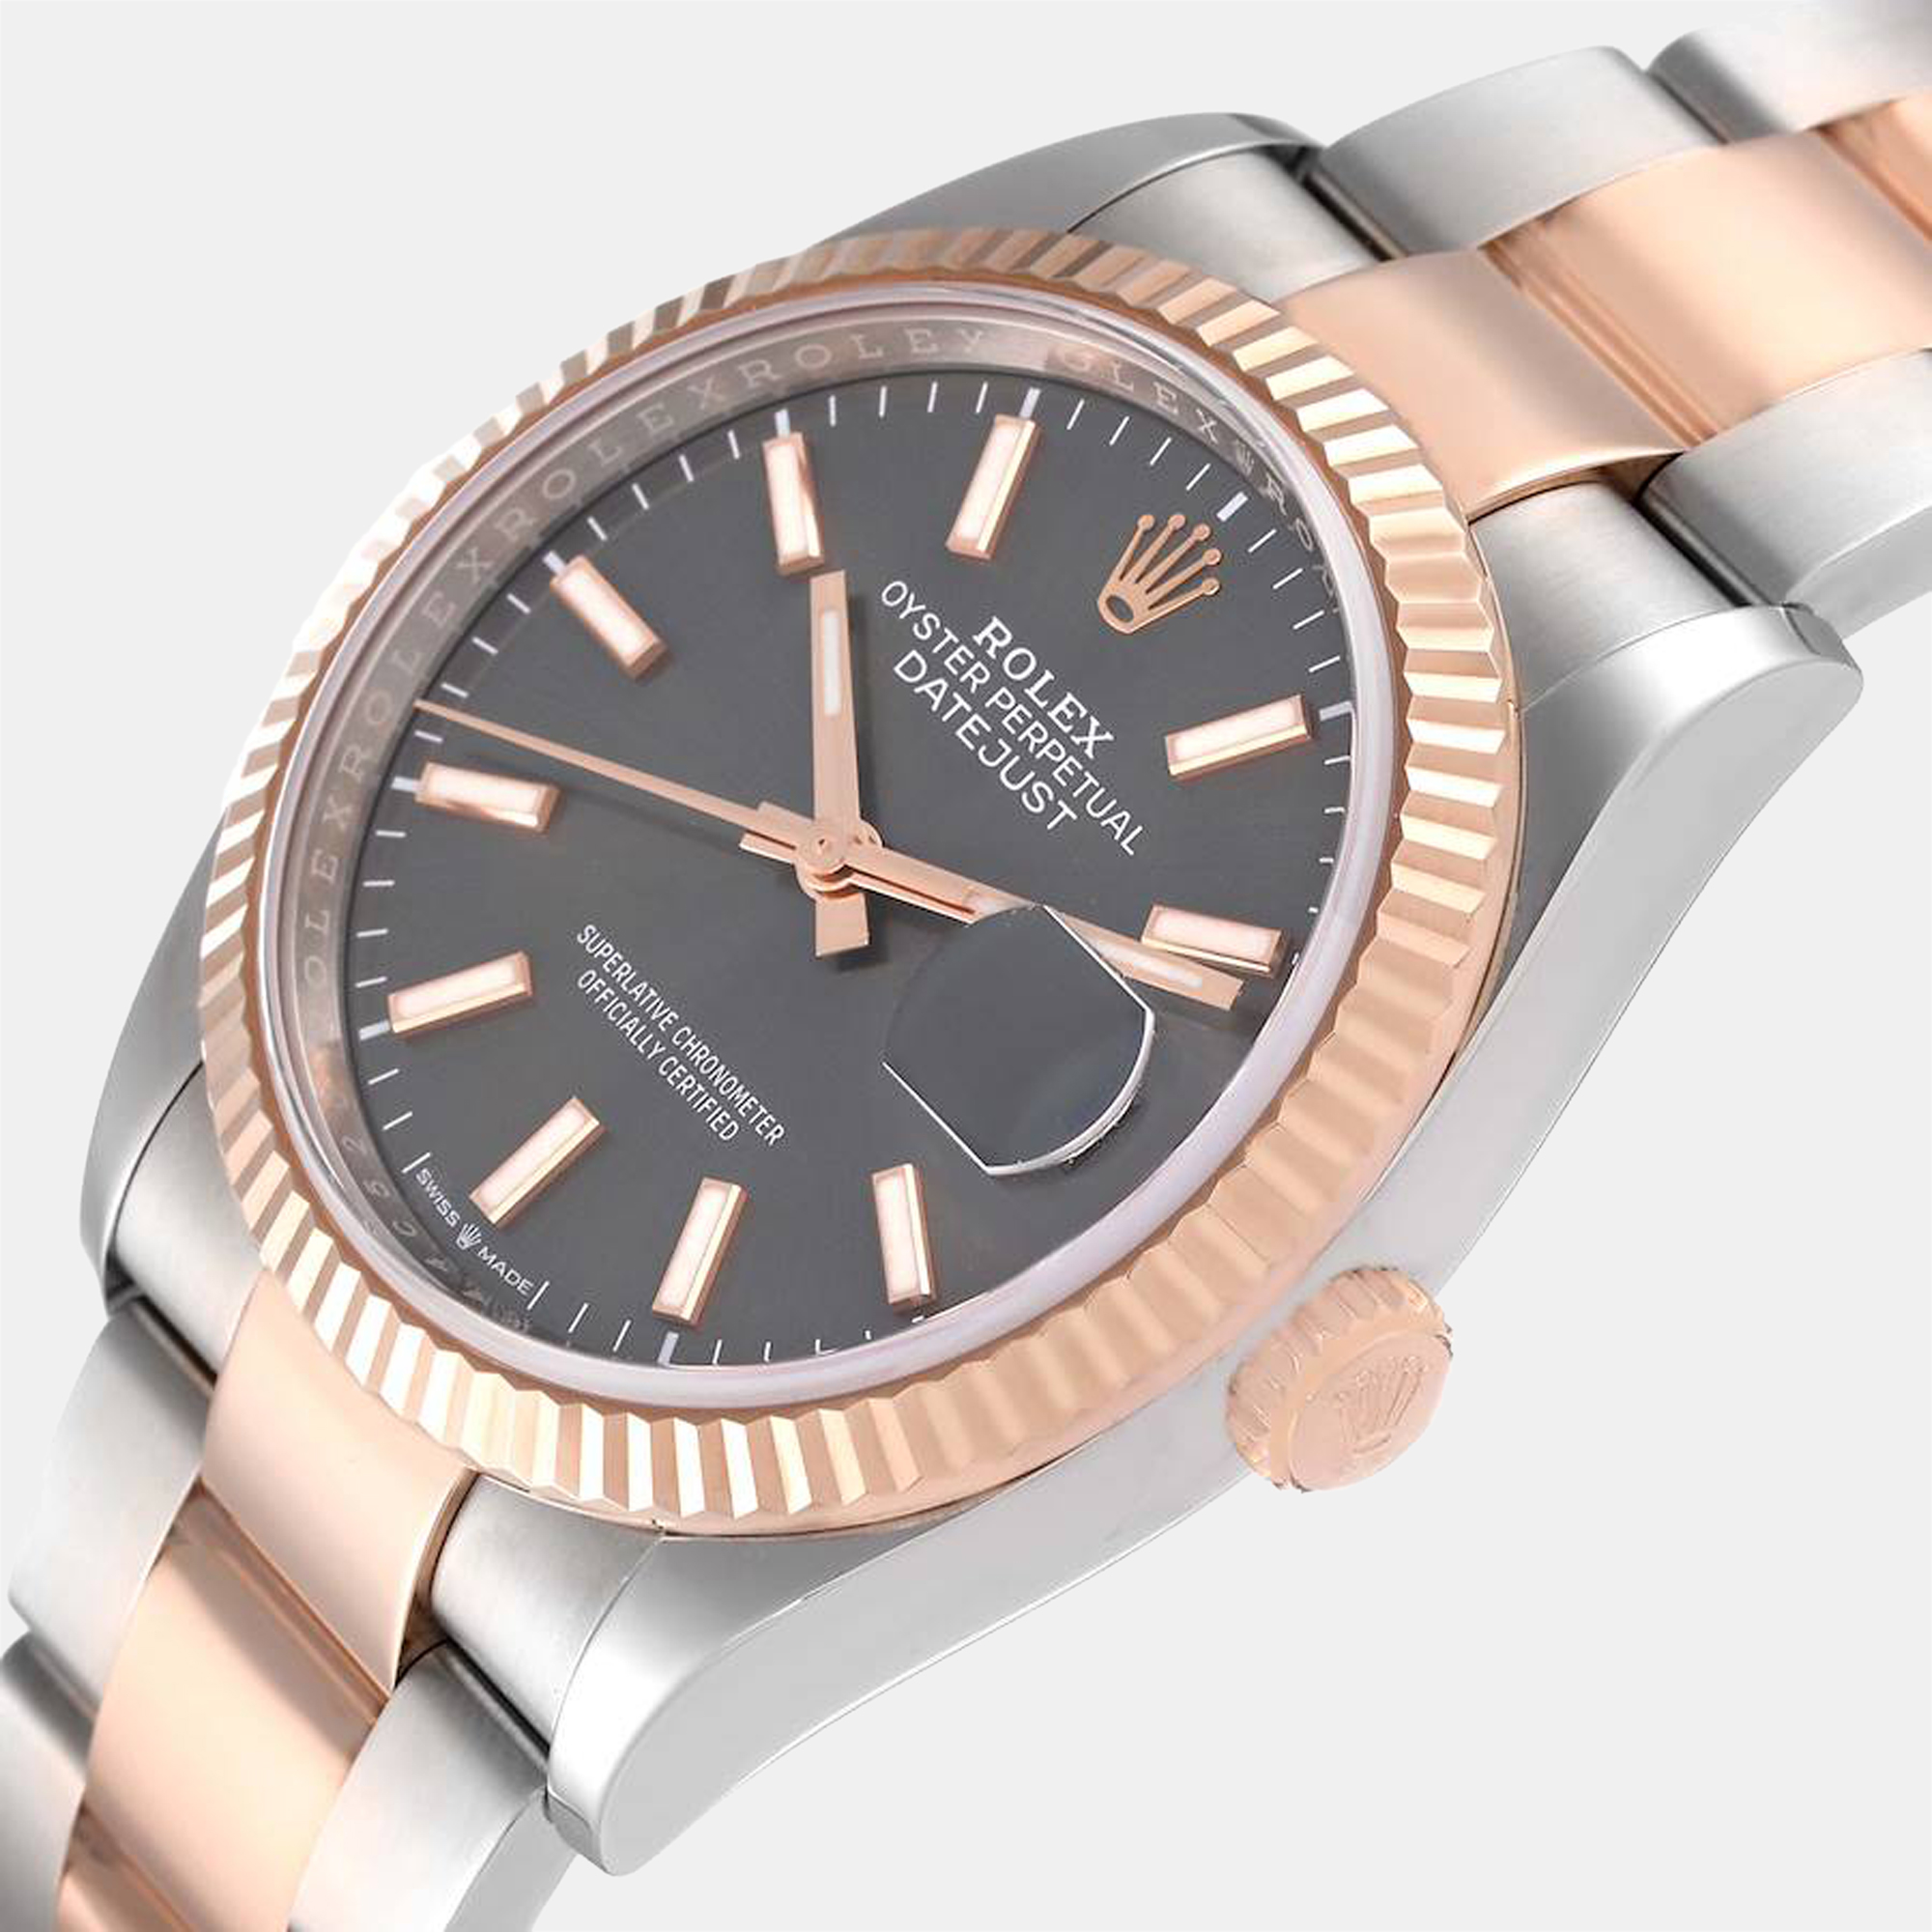 

Rolex Grey 18k Rose Gold And Stainless Steel Datejust 126231 Automatic Men's Wristwatch 36 mm